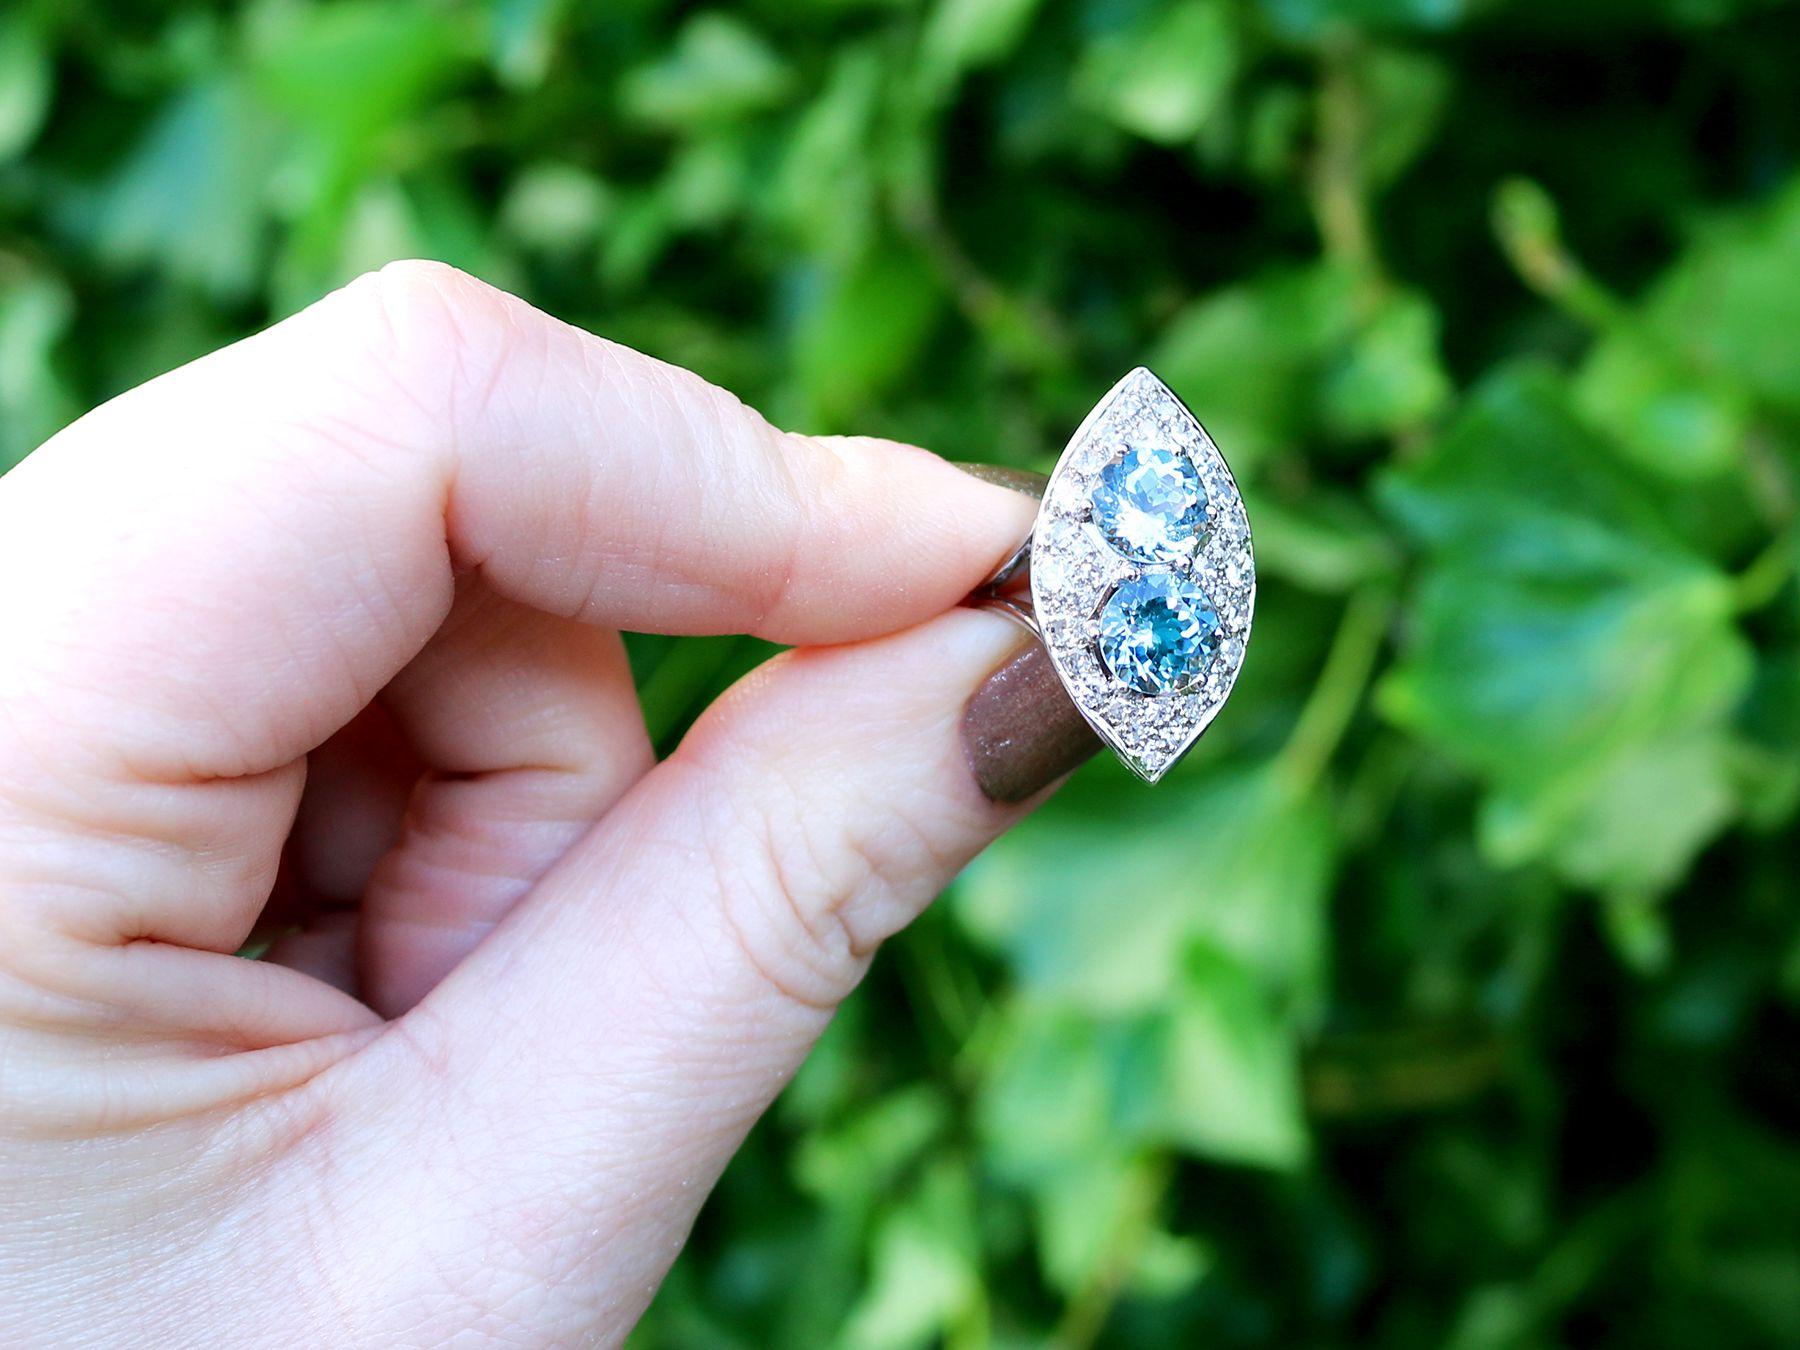 An impressive vintage French 3.03 carat aquamarine and 1.42 carat diamond, 18 karat white gold marquise ring; part of our diverse vintage jewelry and estate jewelry collections.

This fine and impressive 1950s aquamarine and diamond ring has been